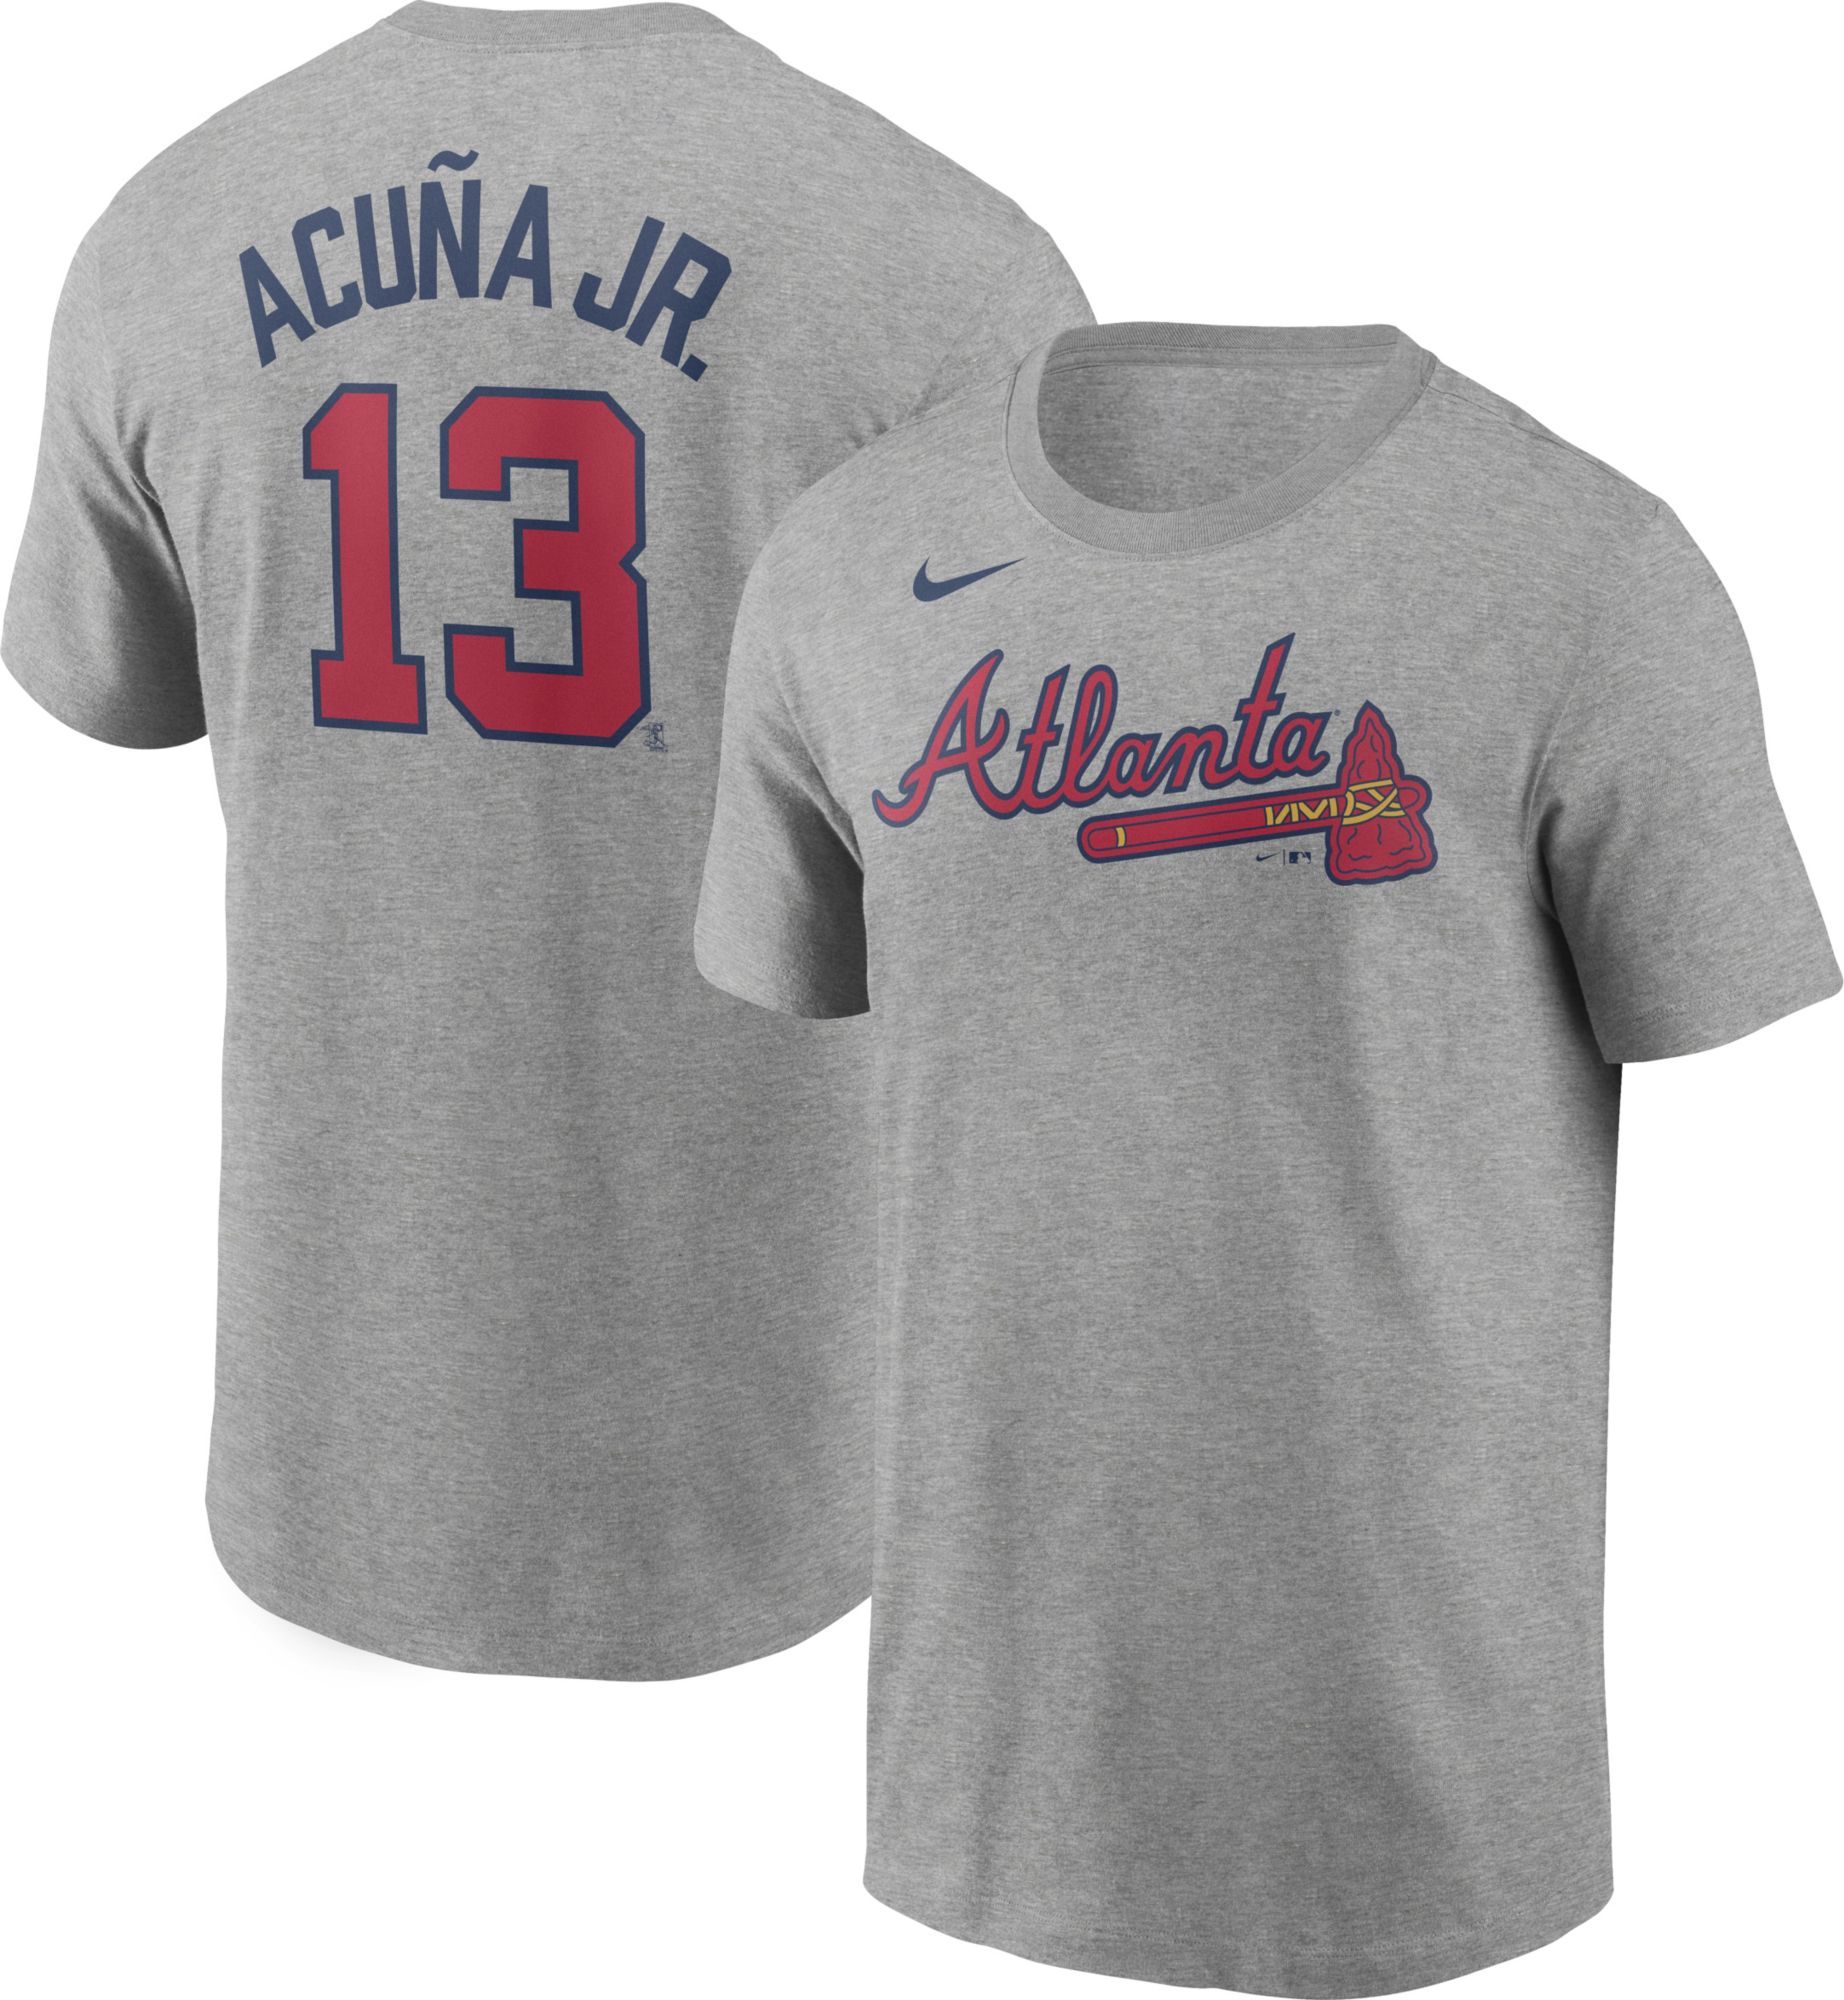 Ronald Acuña Jr. National League 2023 All-Star Game Men's Nike MLB Limited Jersey